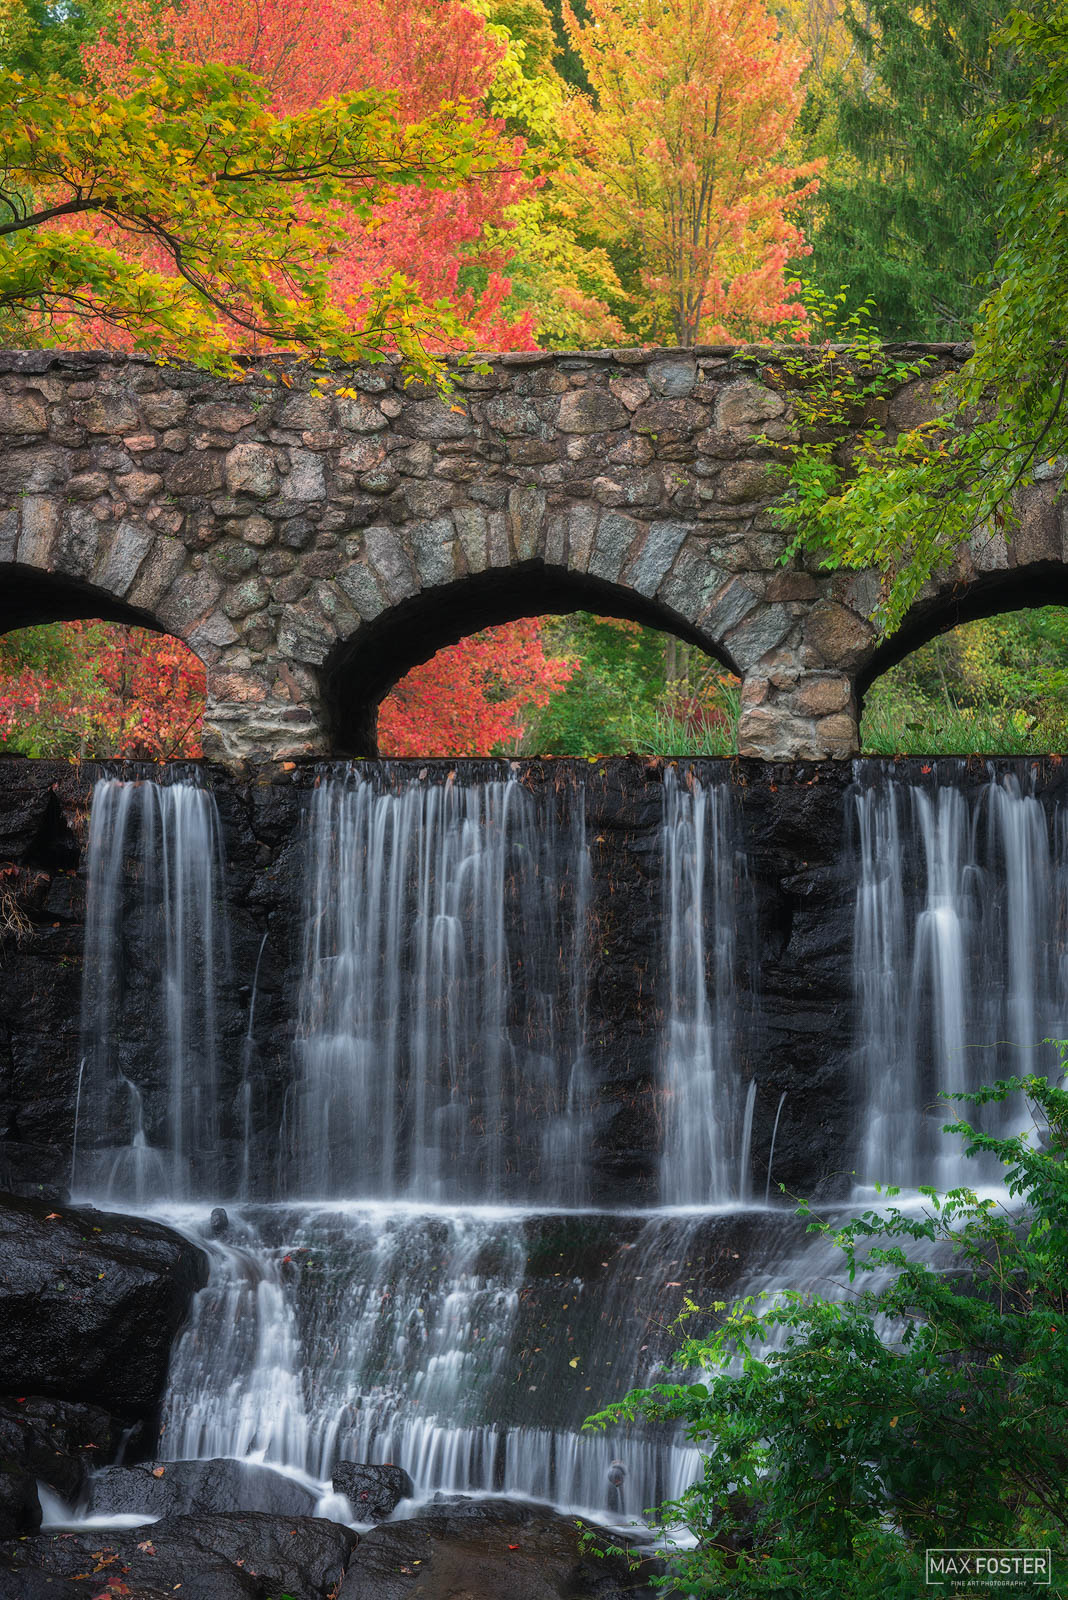 Add color to your walls with Golden Days, Max Foster's limited edition photography print of Case Falls in Connecticut from his...